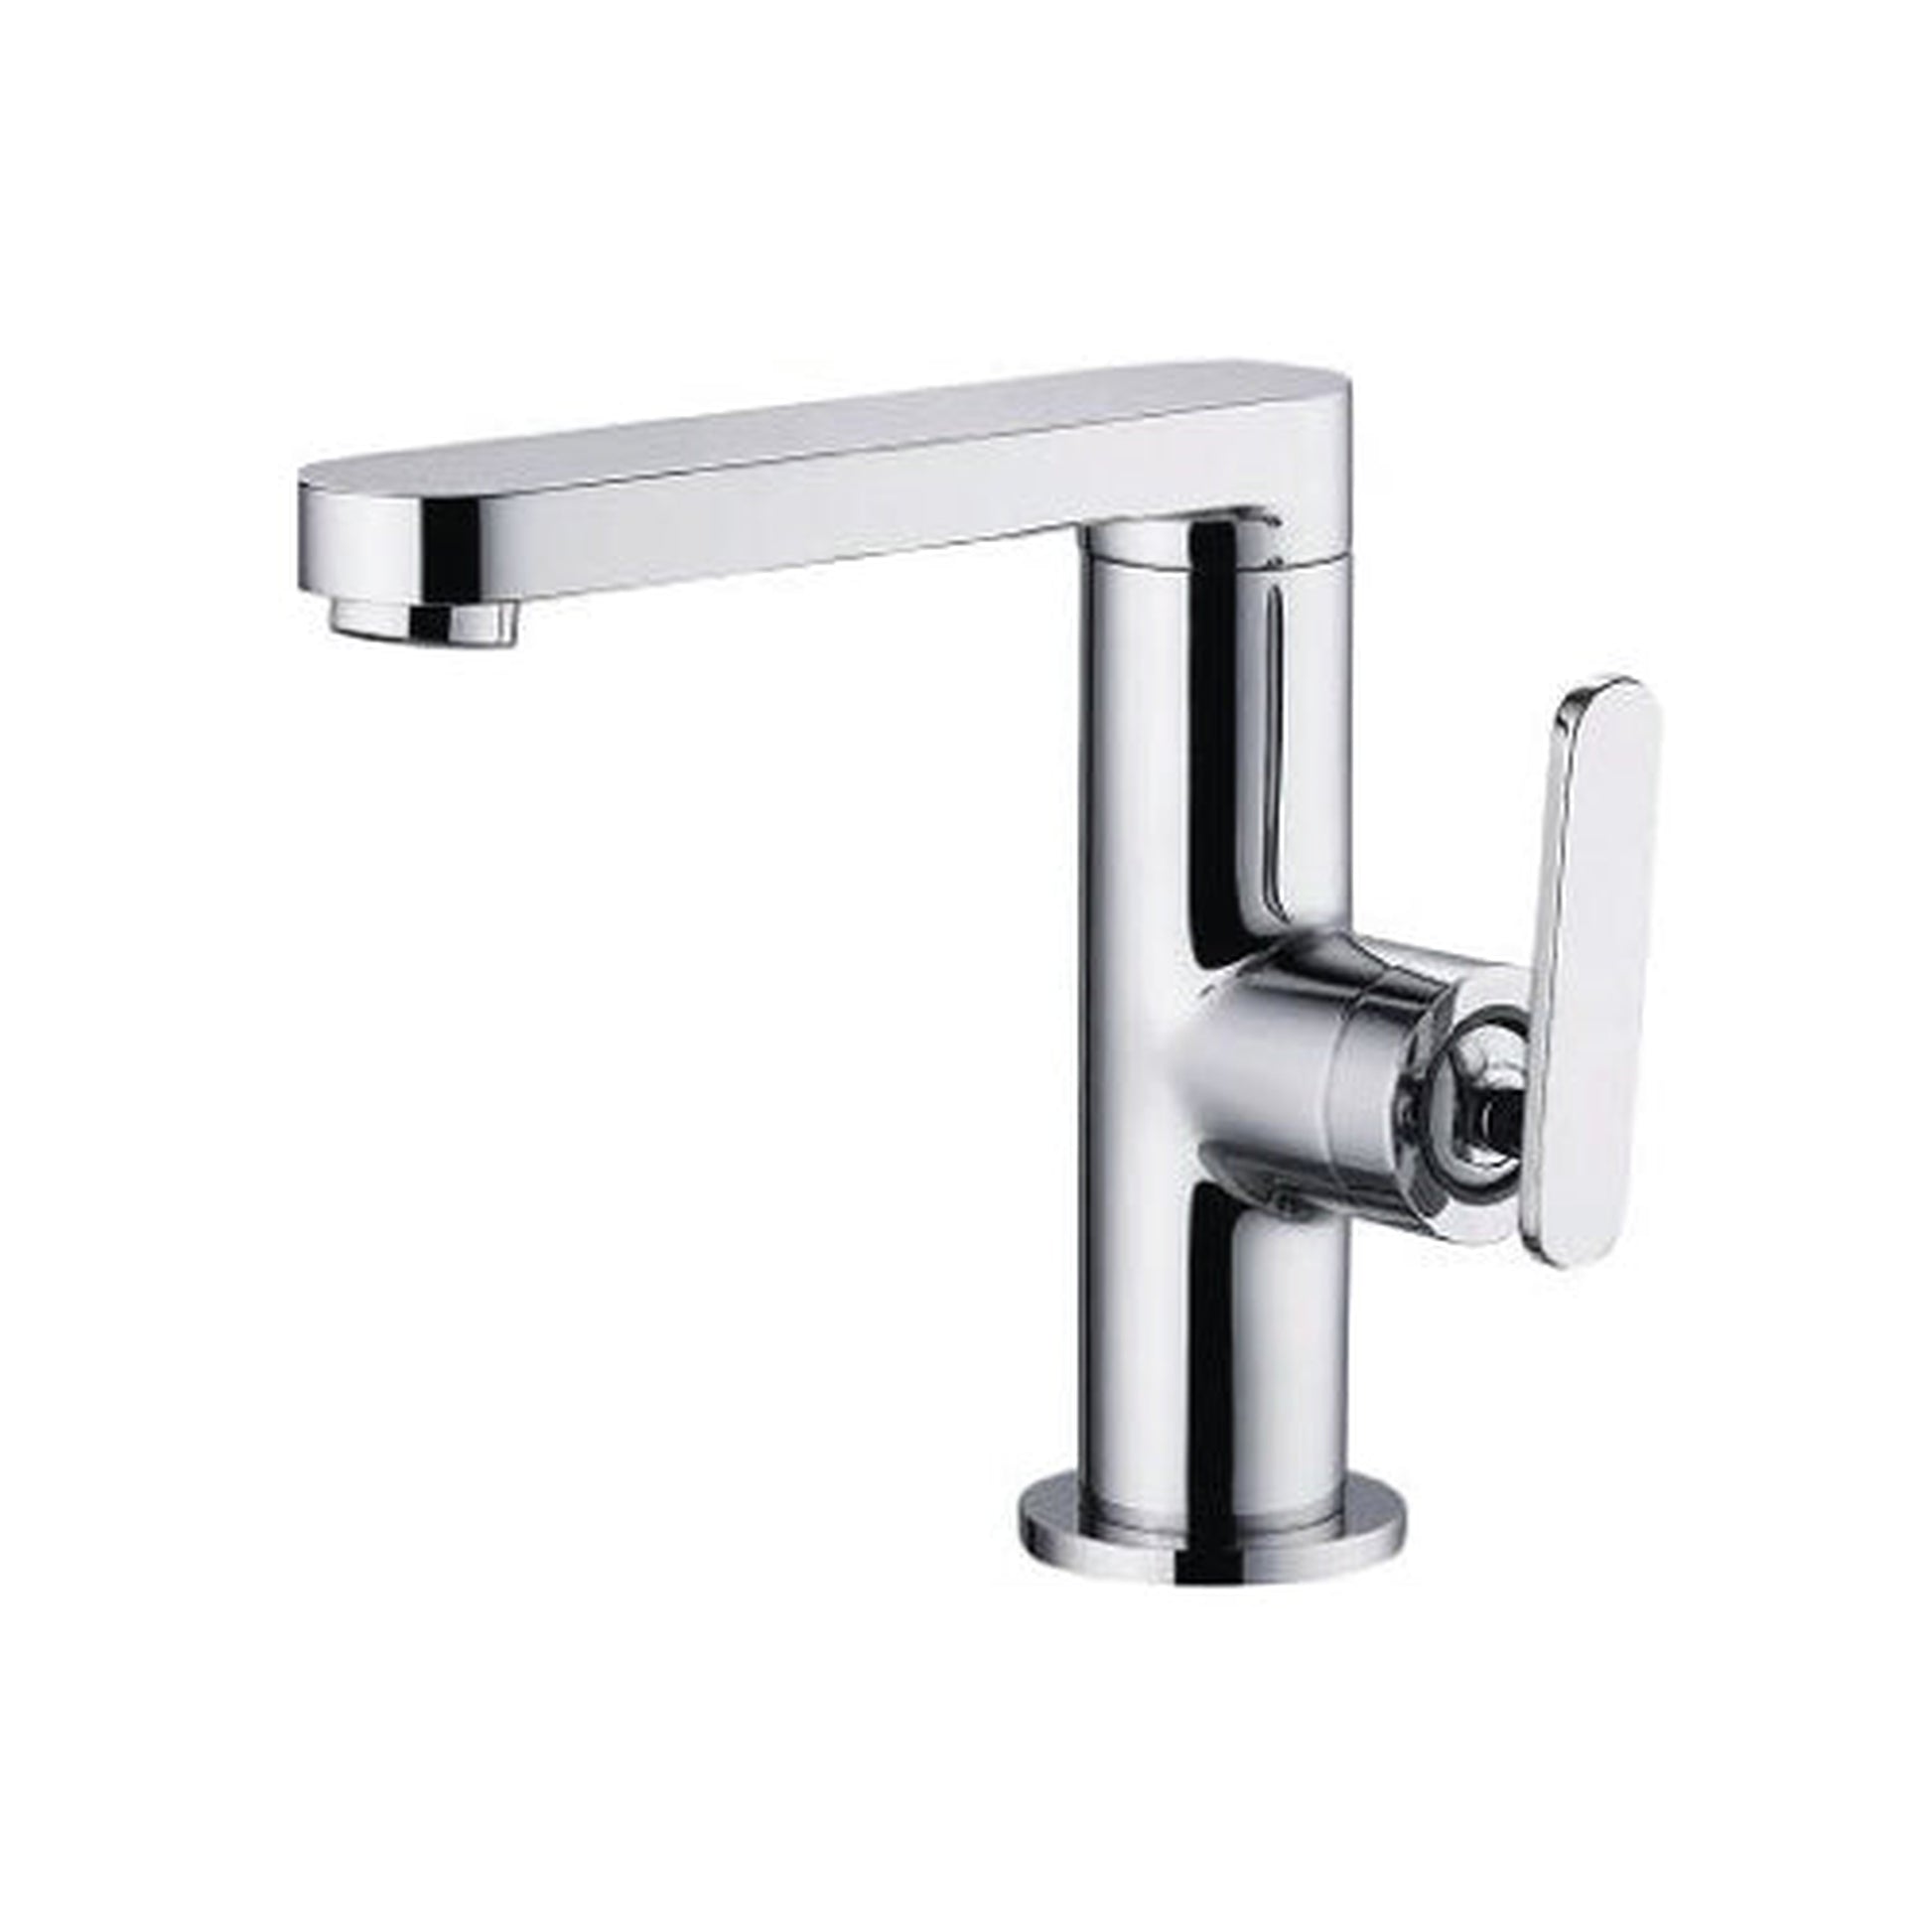 Isenberg Serie 110 6" Single-Hole Chrome Deck-Mounted Bathroom Sink Faucet With Pop-Up Drain